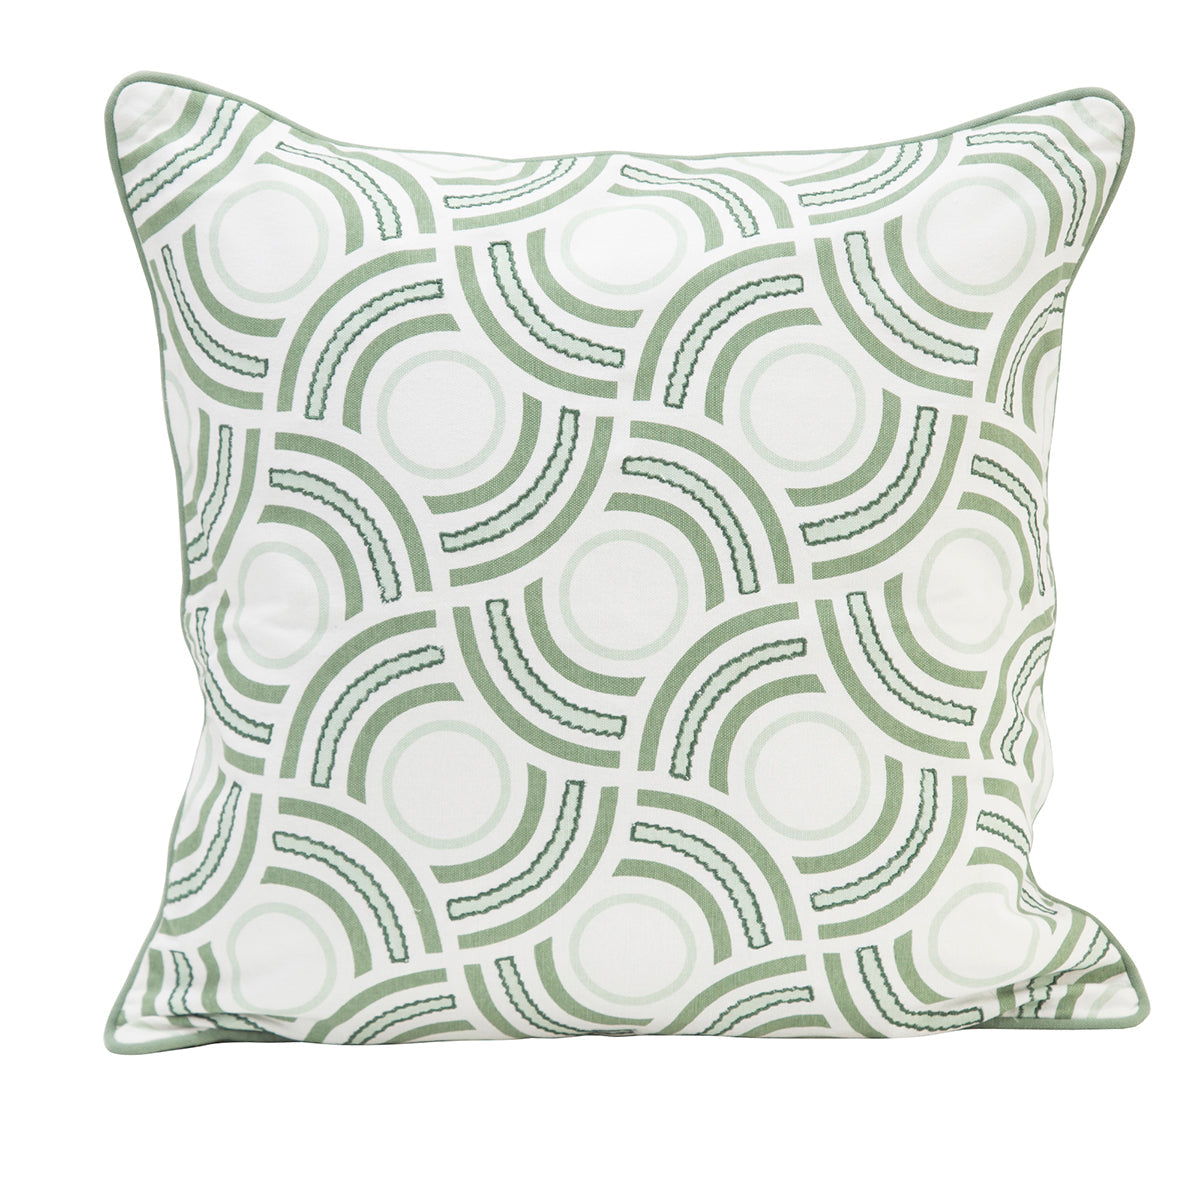 Spherical Wings Printed & Embroidered Cushion Cover